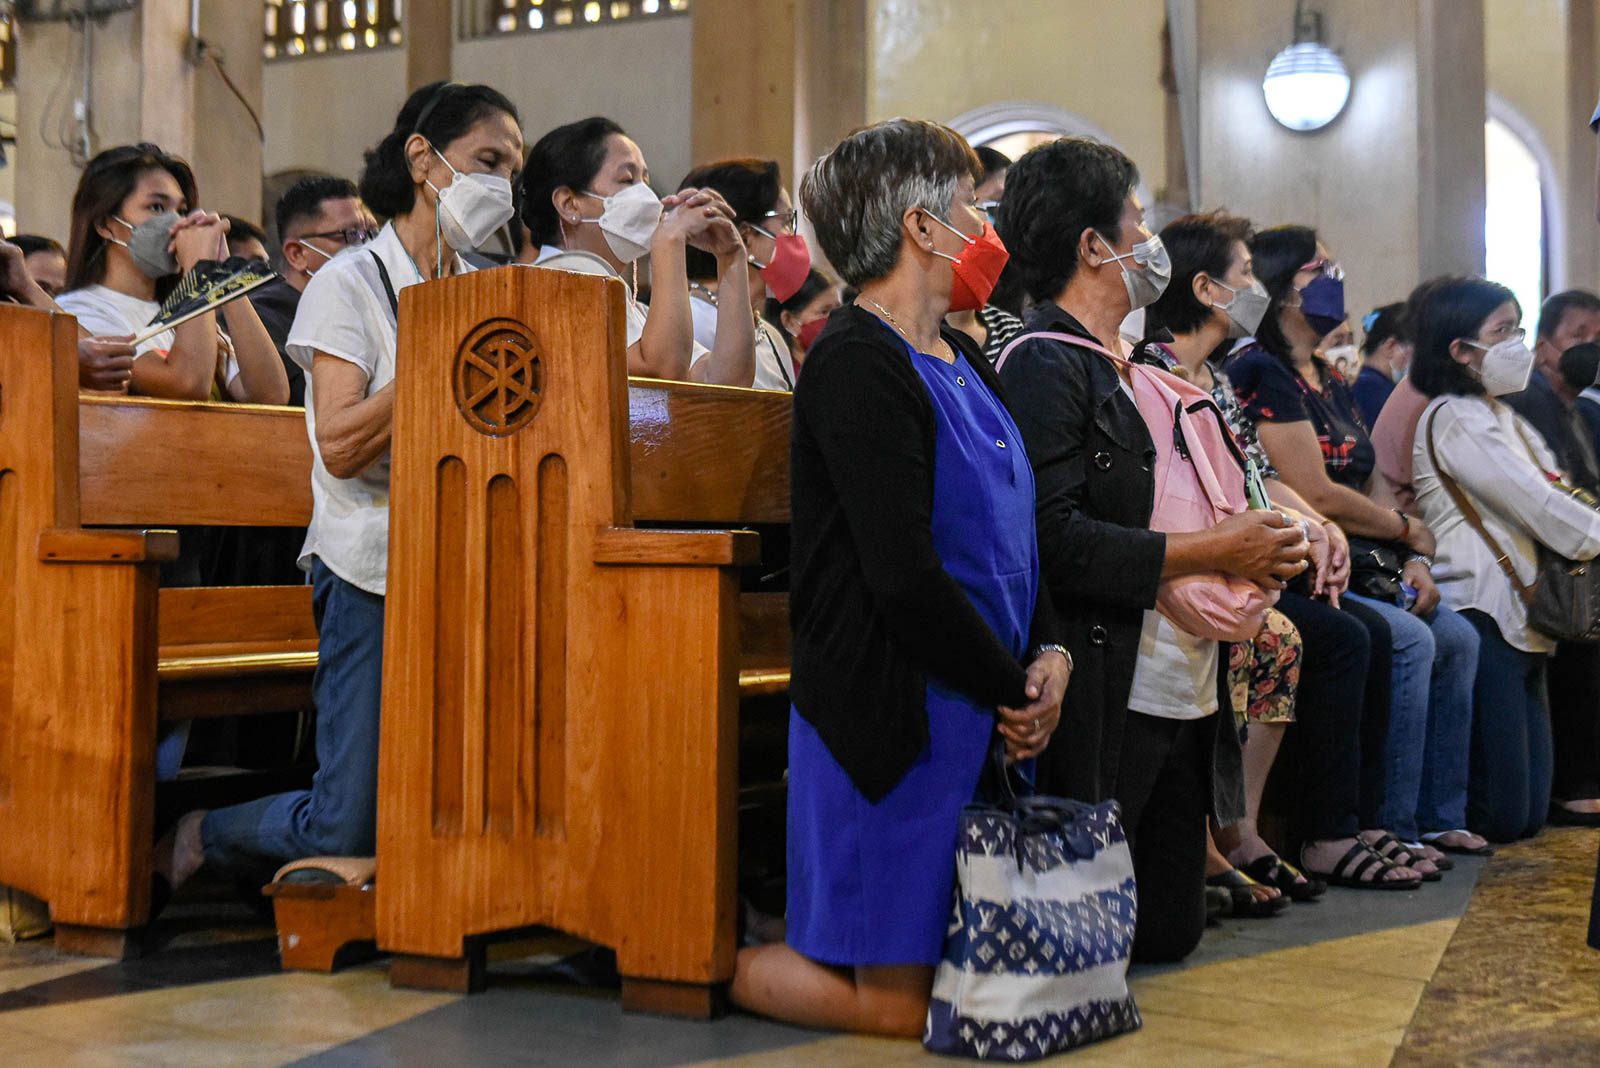 Parishes in the Archdiocese of Manila close again due to COVID cases -  Roman Catholic Archdiocese of Manila